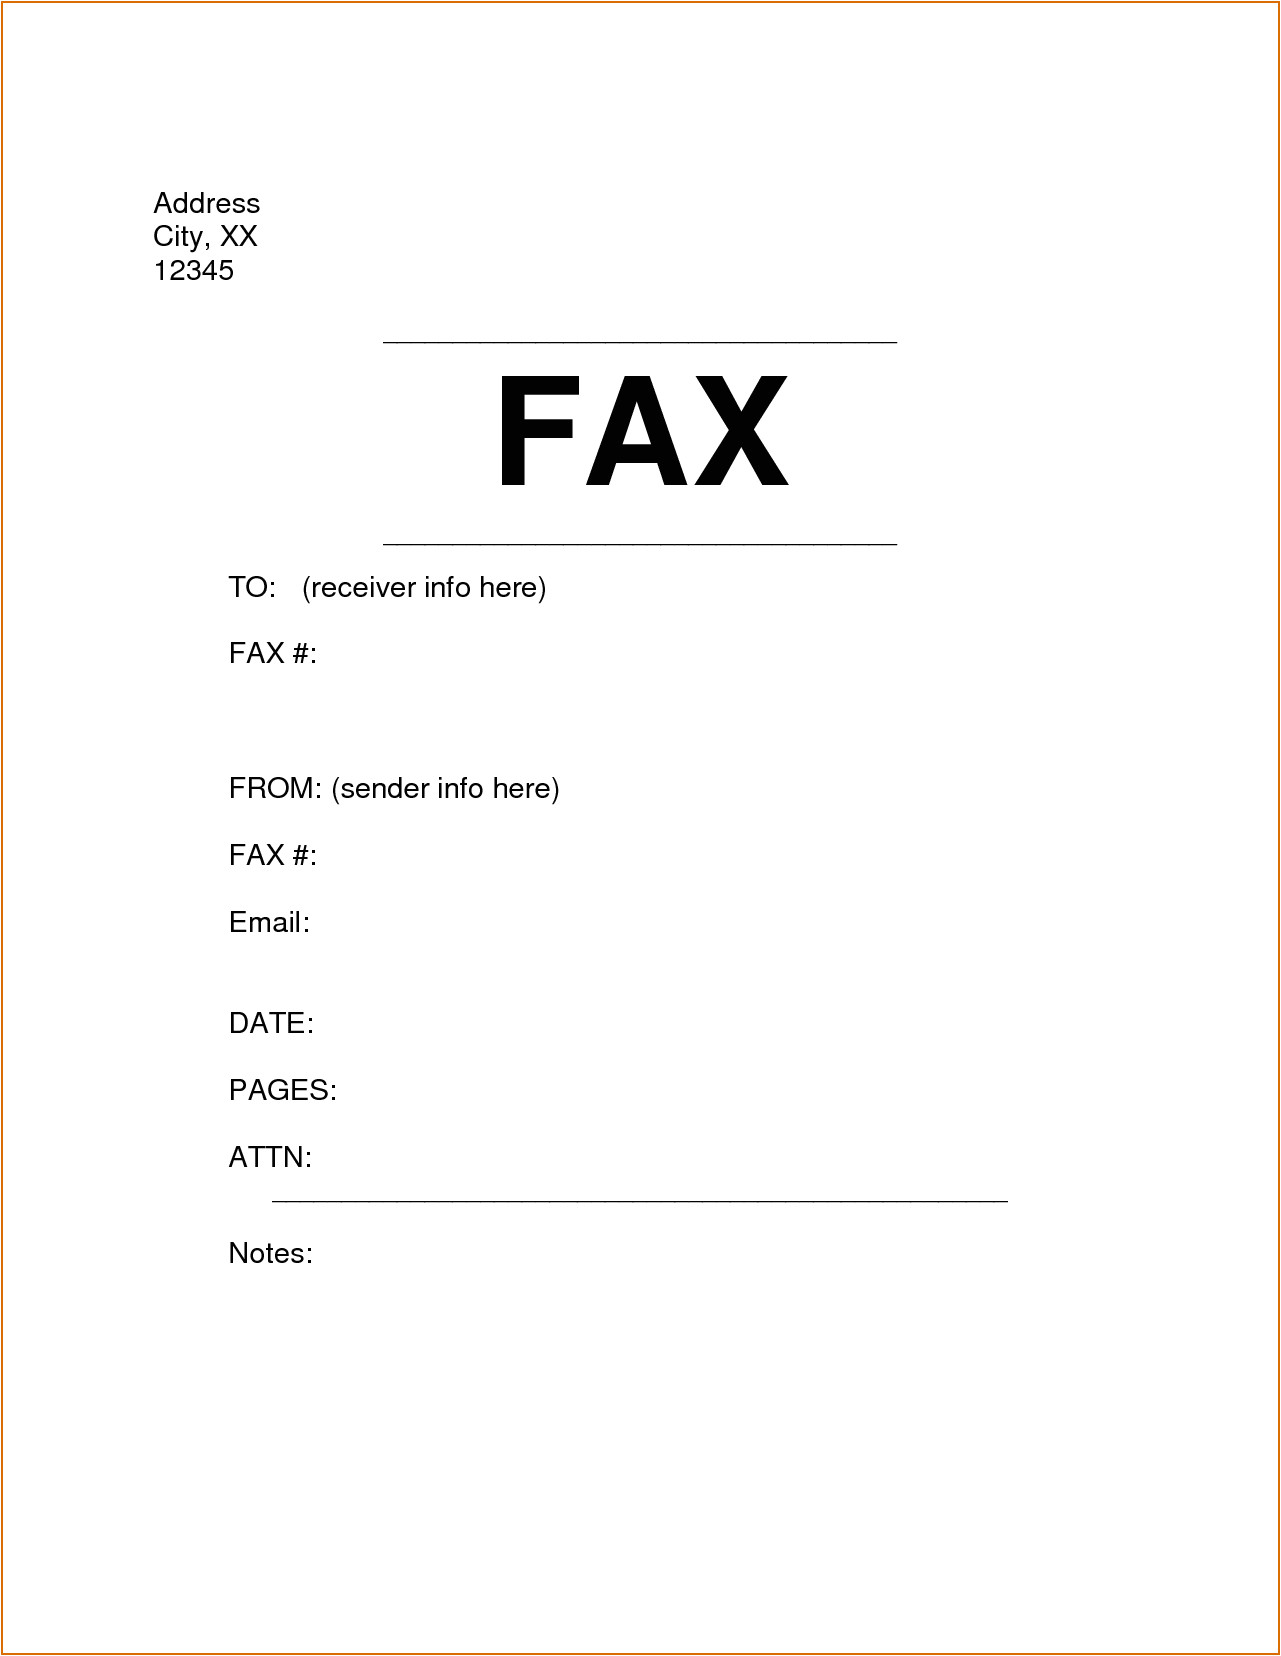 6 fax cover sheet format